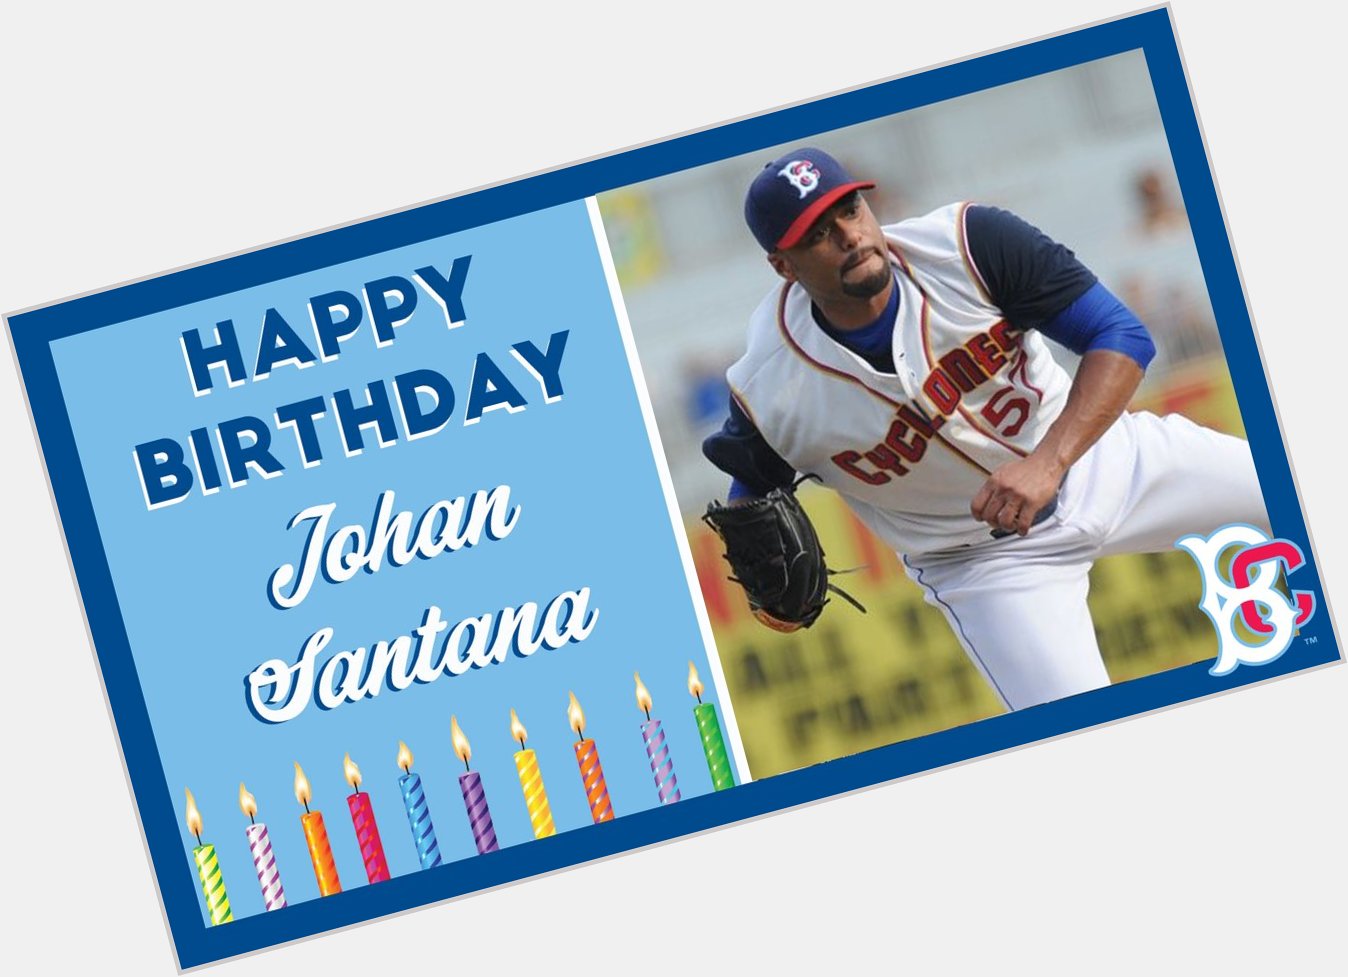 Happy Birthday to the only man to throw a no-hitter as a member of the New York Mets - Johan Santana. 